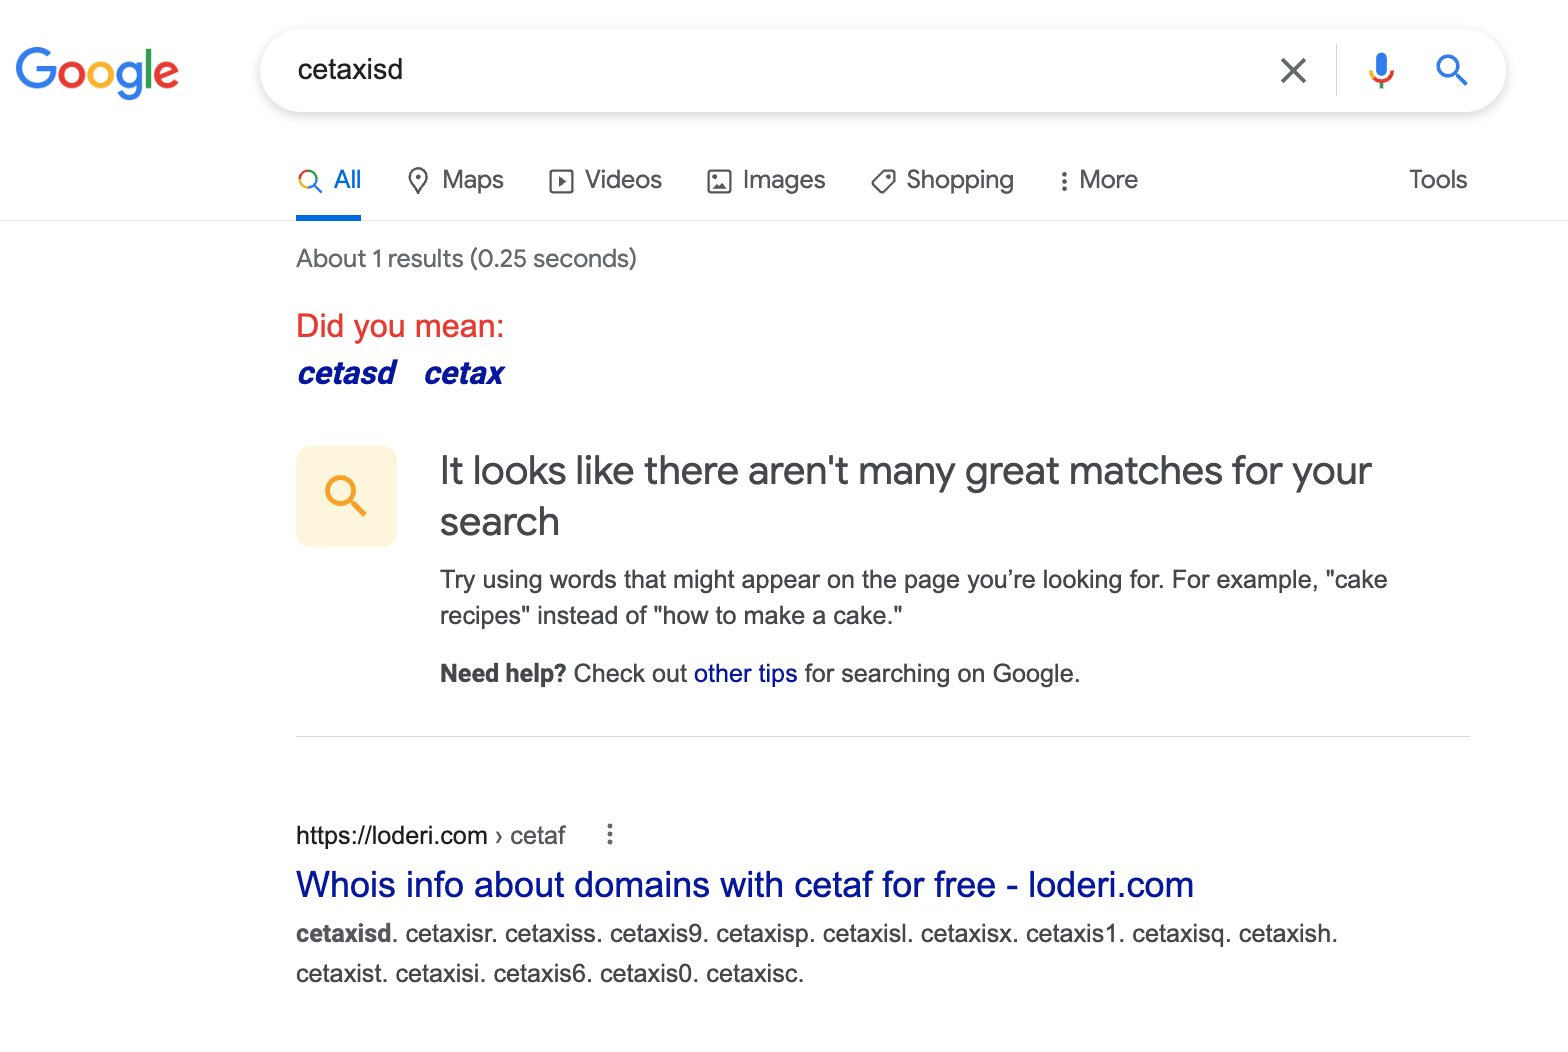 screenshot: Google search results page for [cetaxisd].